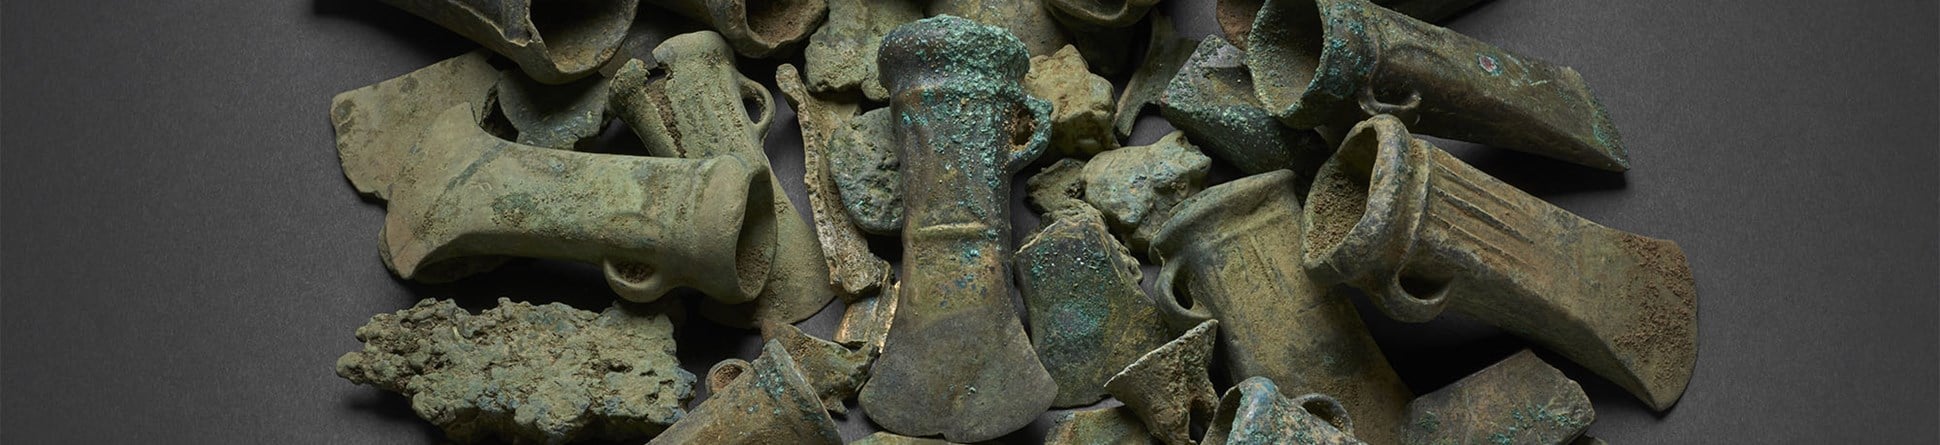 A selection of objects from the Havering Hoard